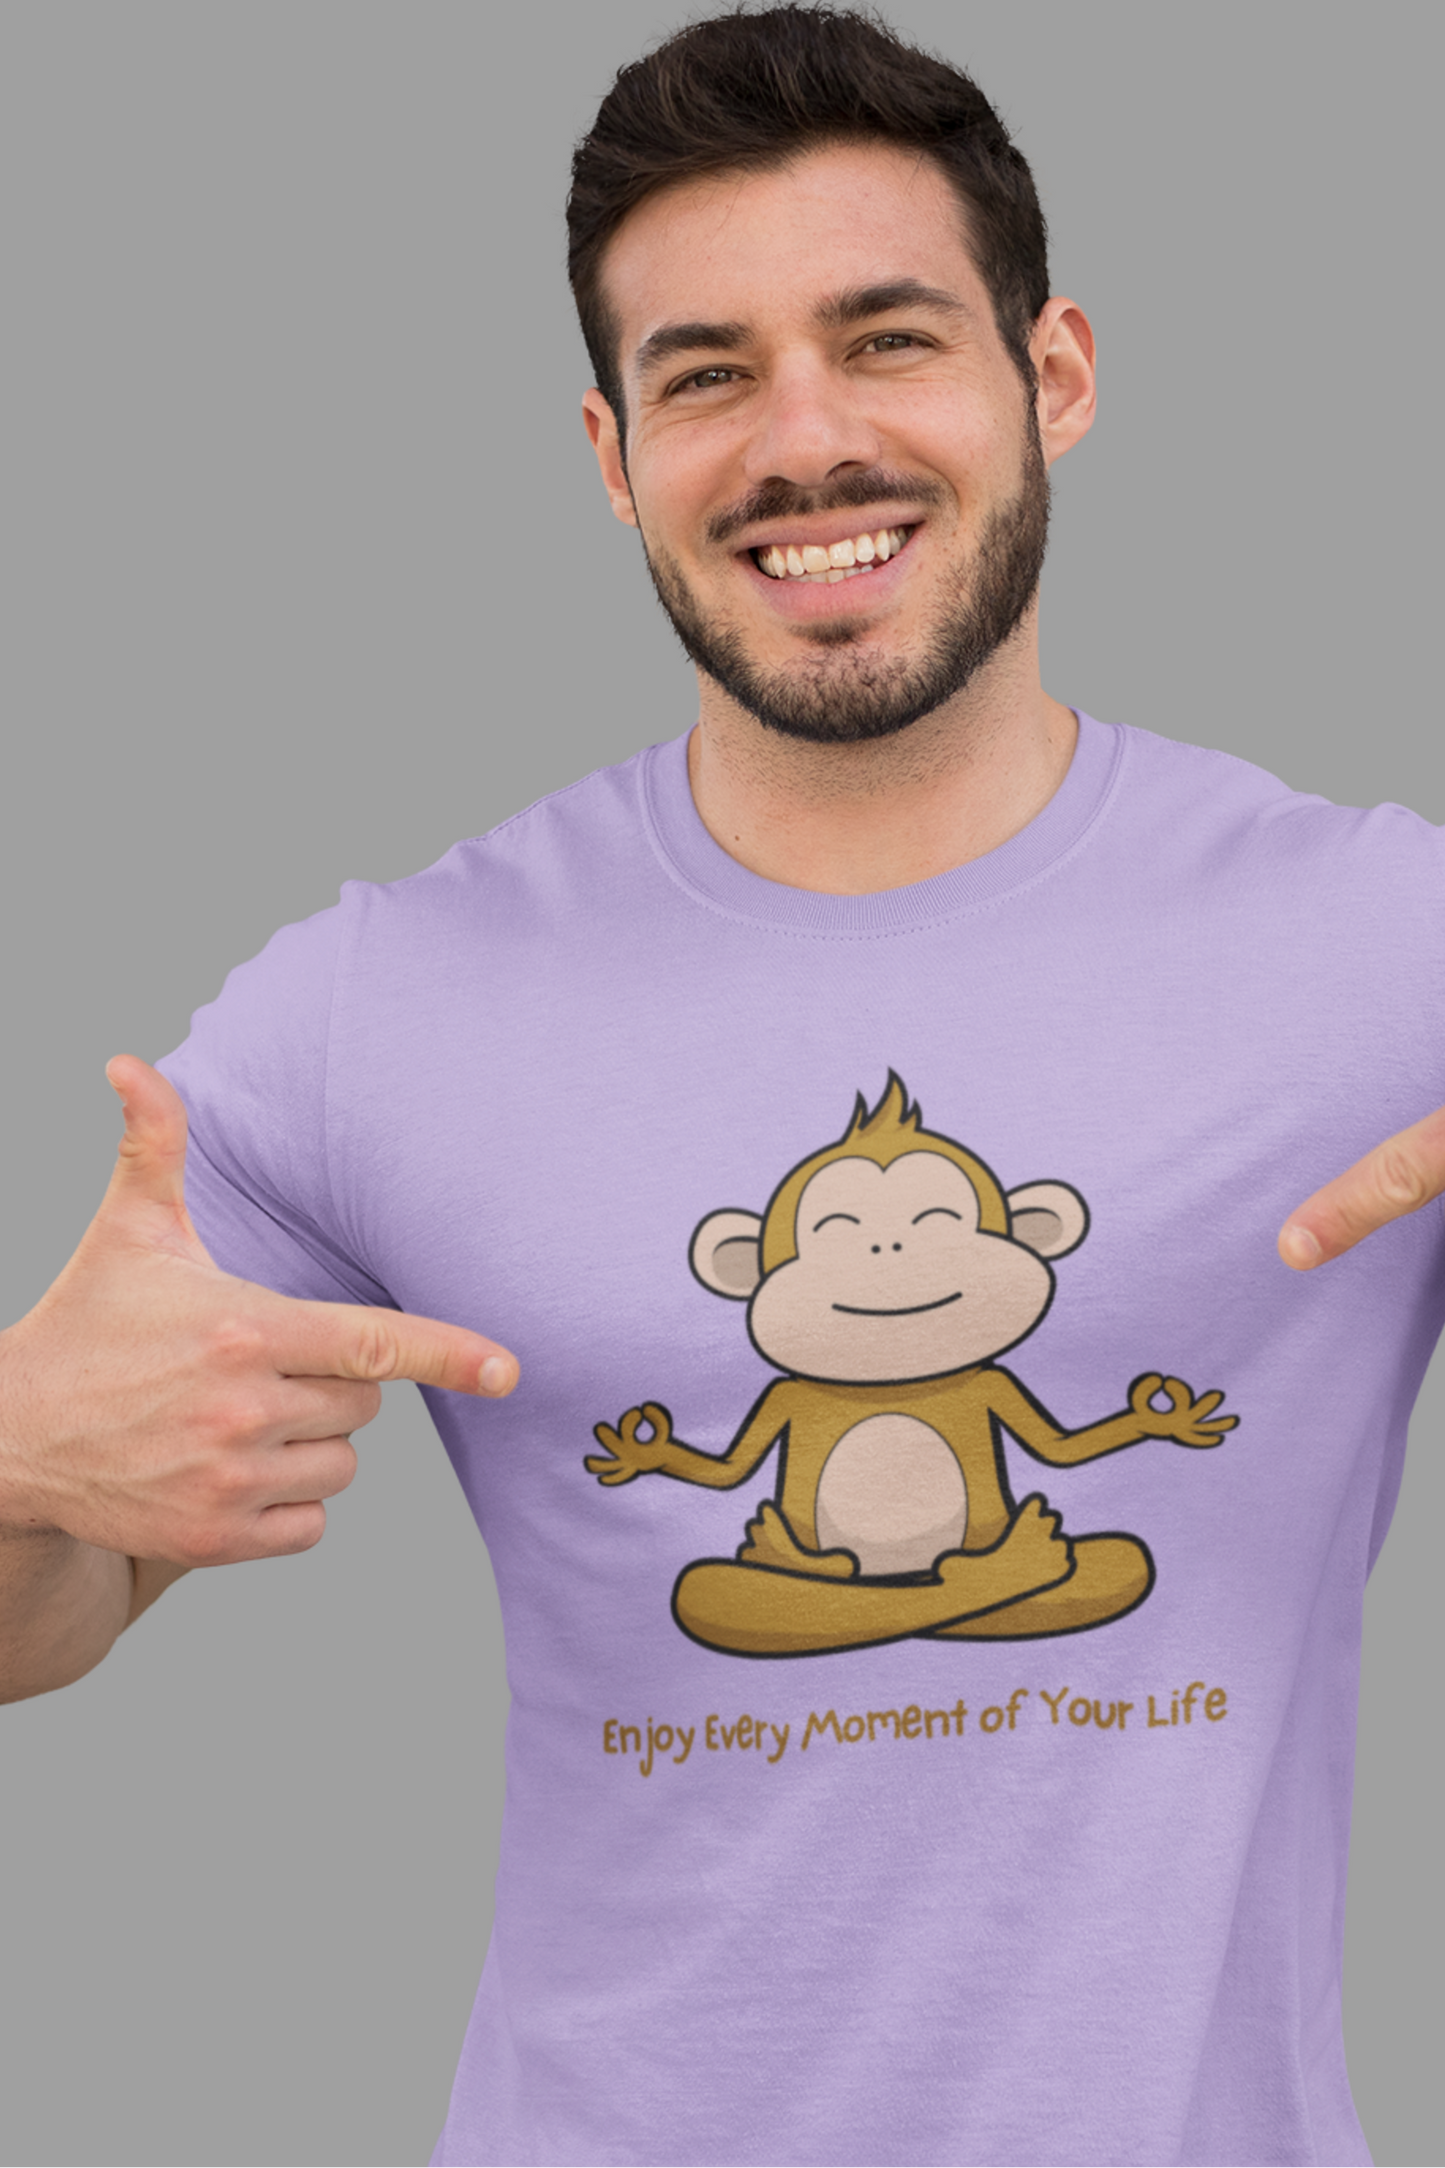 Printed T-Shirt - Enjoy Every Movement Of Your Life